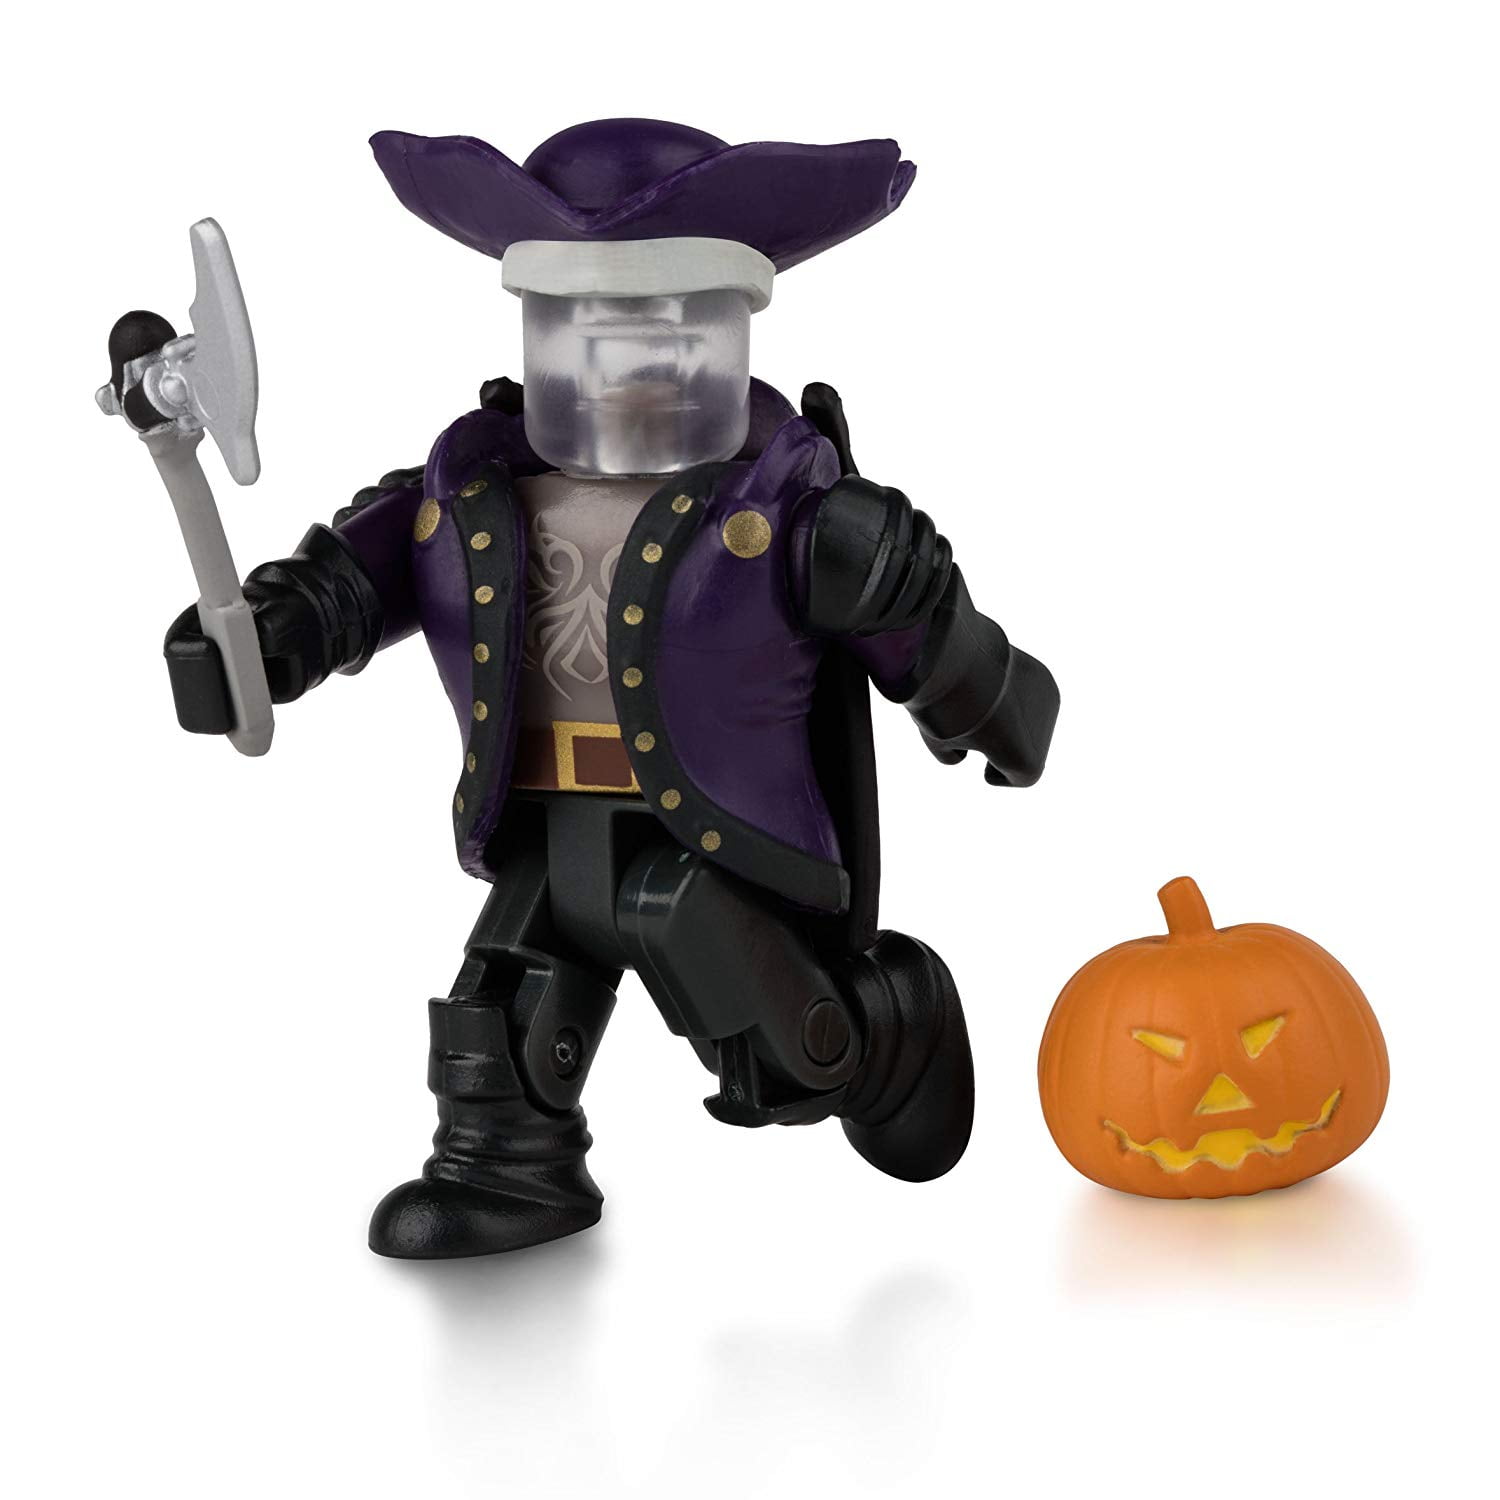 Headless Horseman Figure With Exclusive Virtual Item Game Code Roblox Headless Horseman Figure Packwalmartes With One Figure Accessories And Collector S Checklist By Roblox Walmart Com Walmart Com - my roblox game icon coems up as a checklist